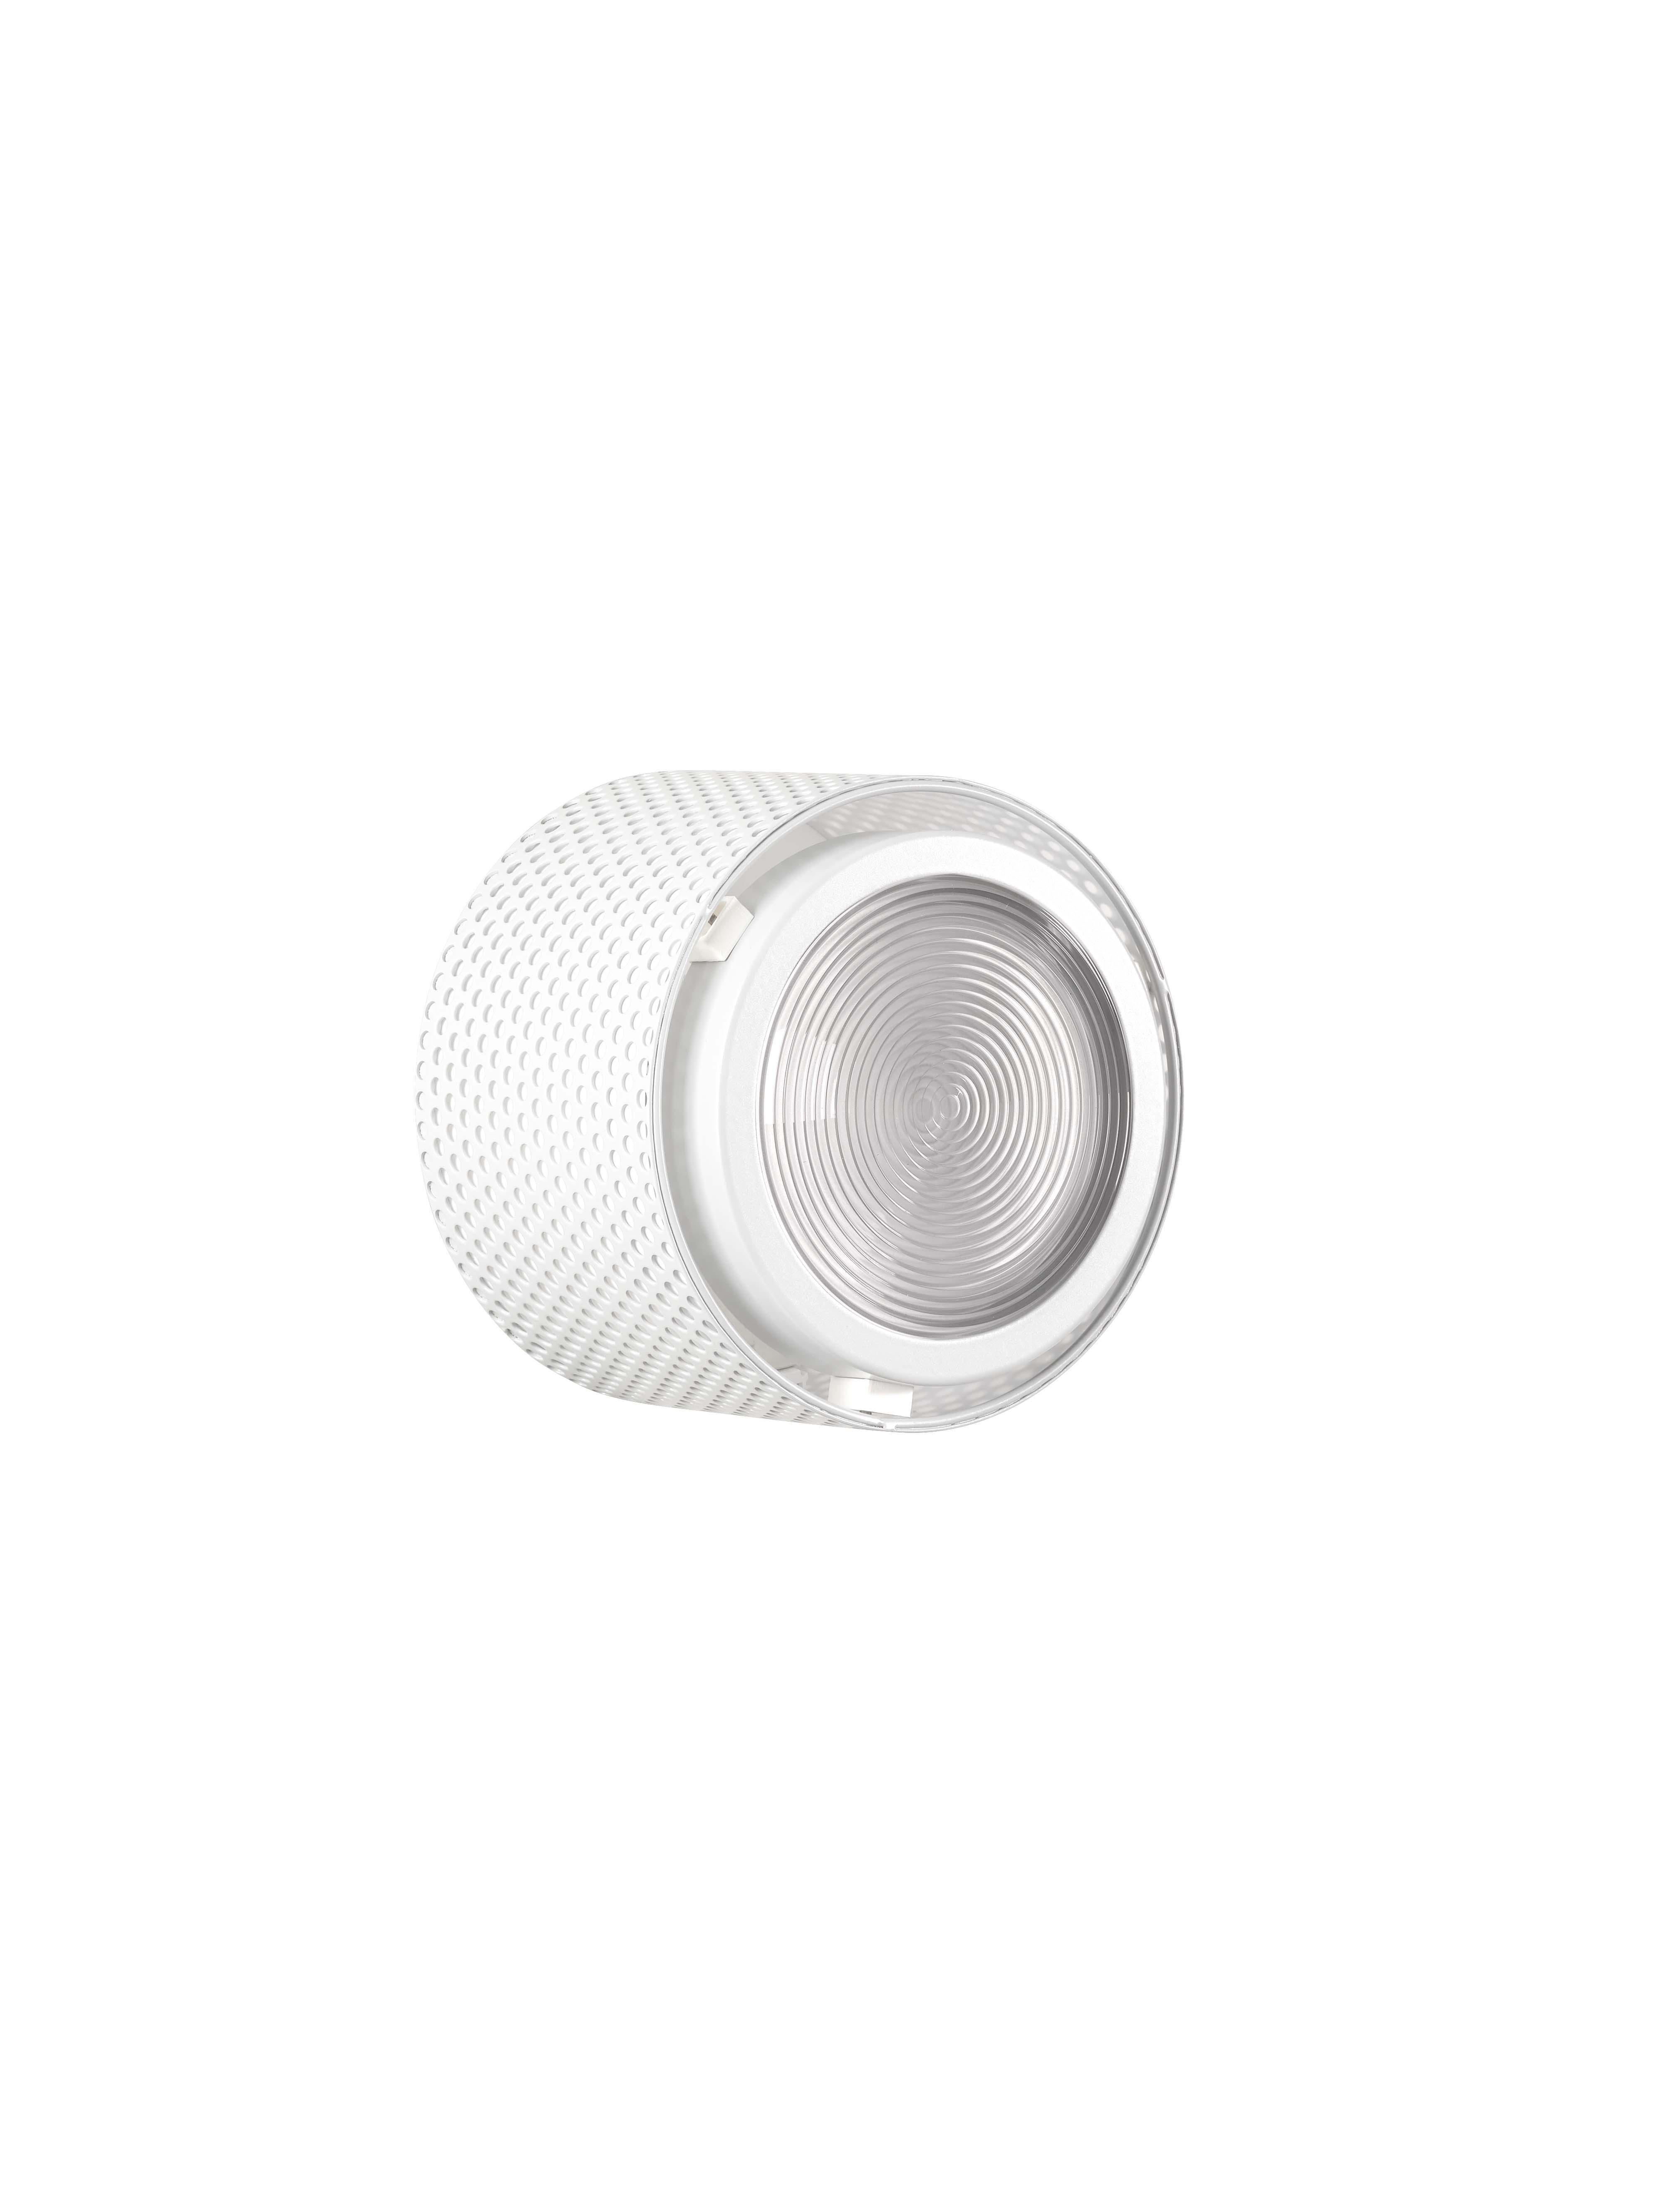 Small Pierre Guariche 'G13' Wall or Ceiling Light for Sammode Studio in White For Sale 4